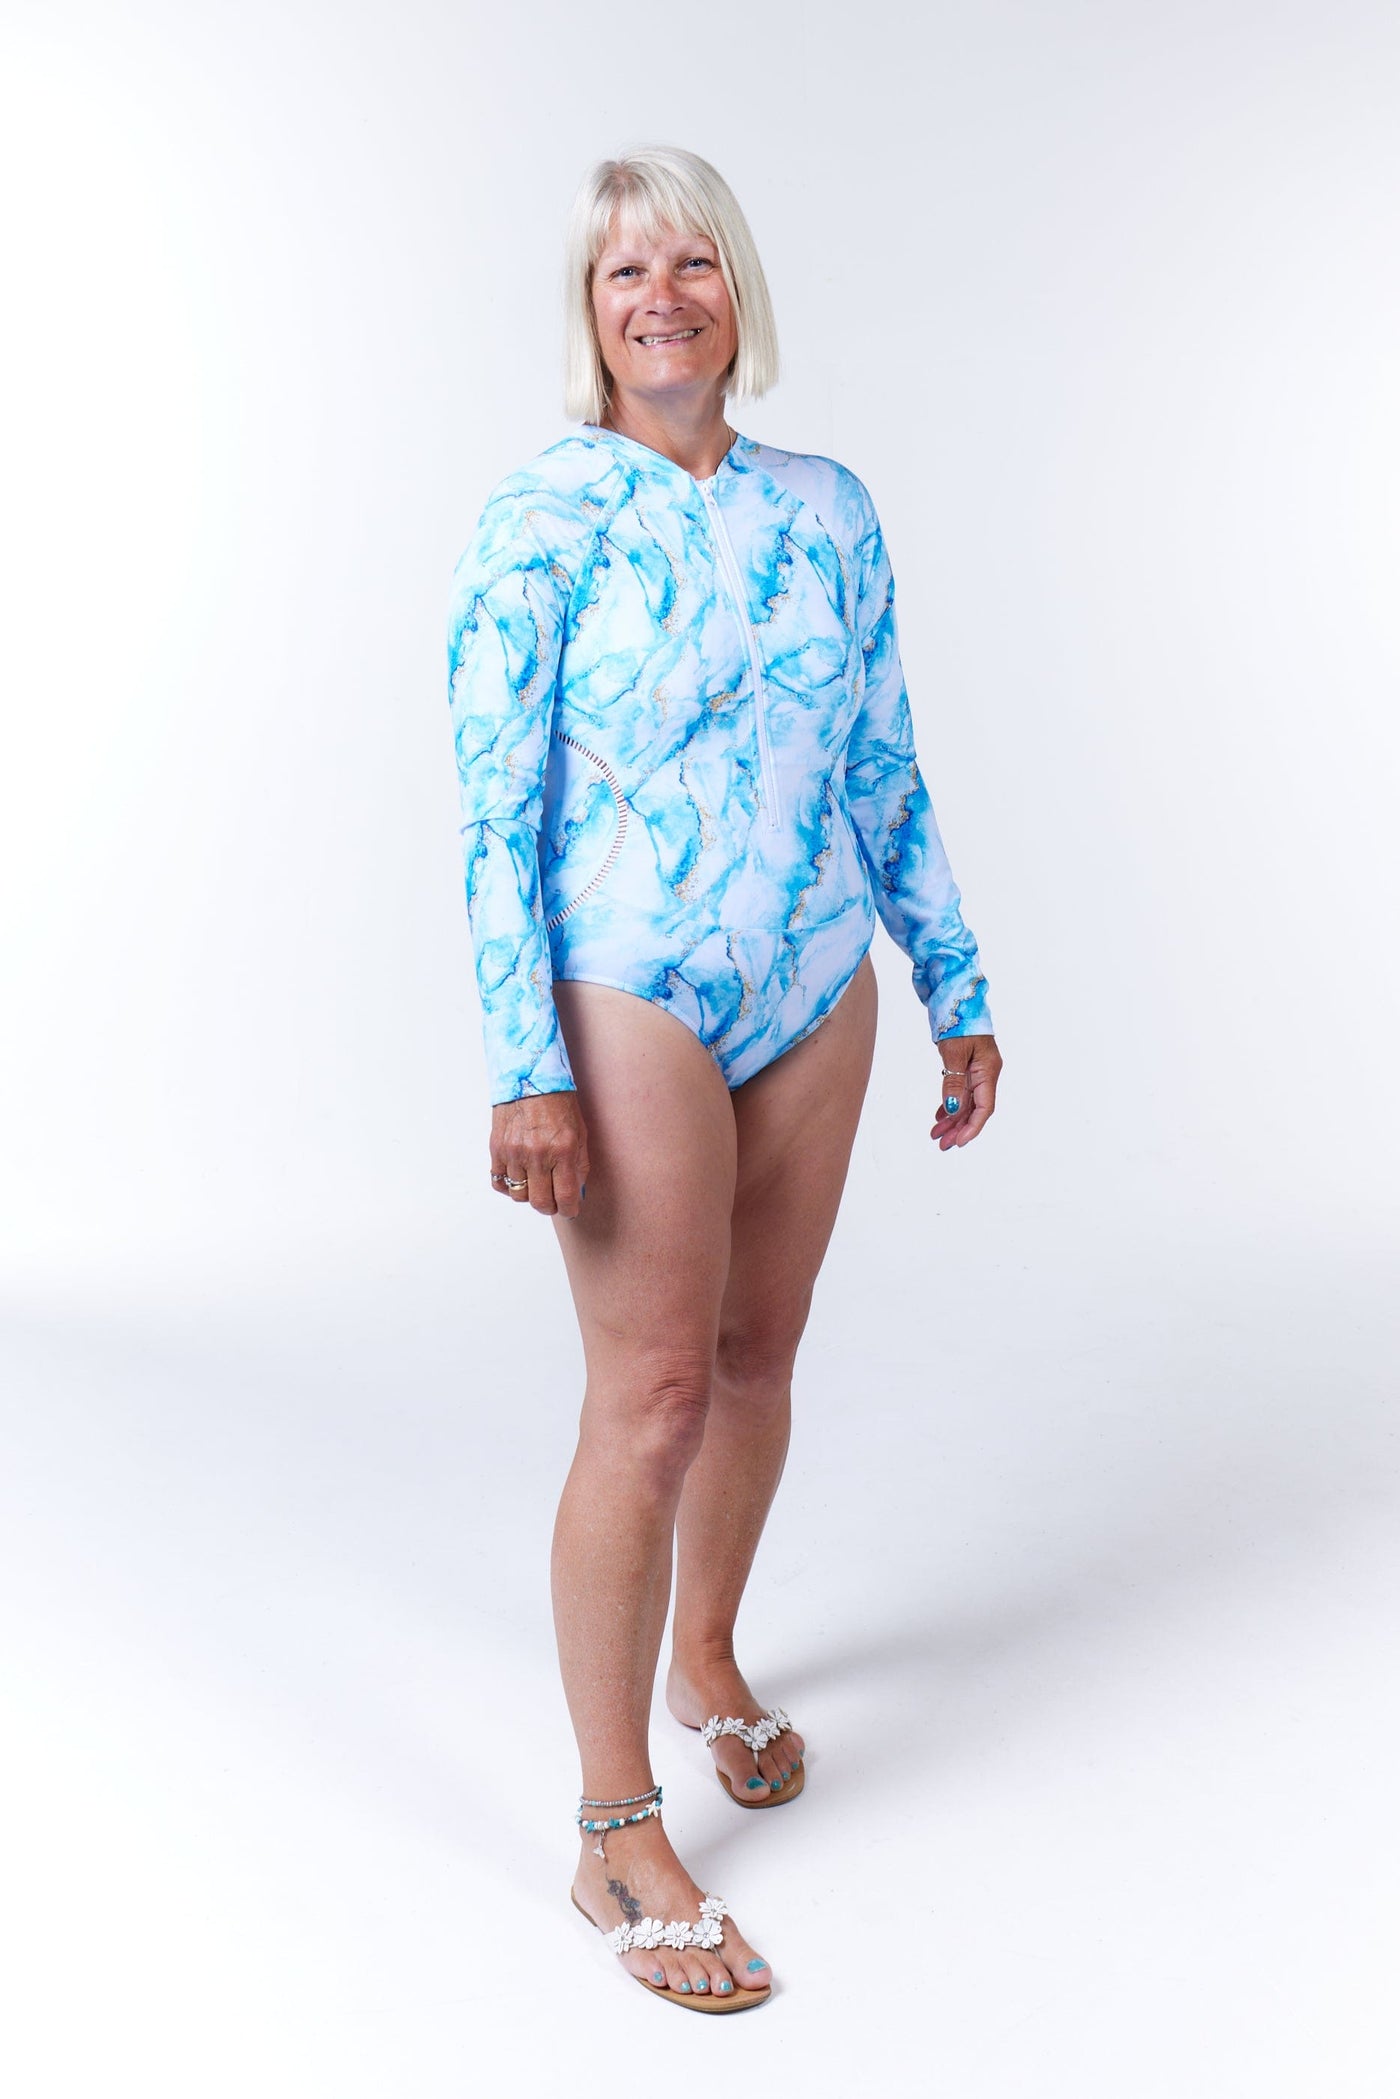 One Piece Swimsuit With Long Arms - Blue